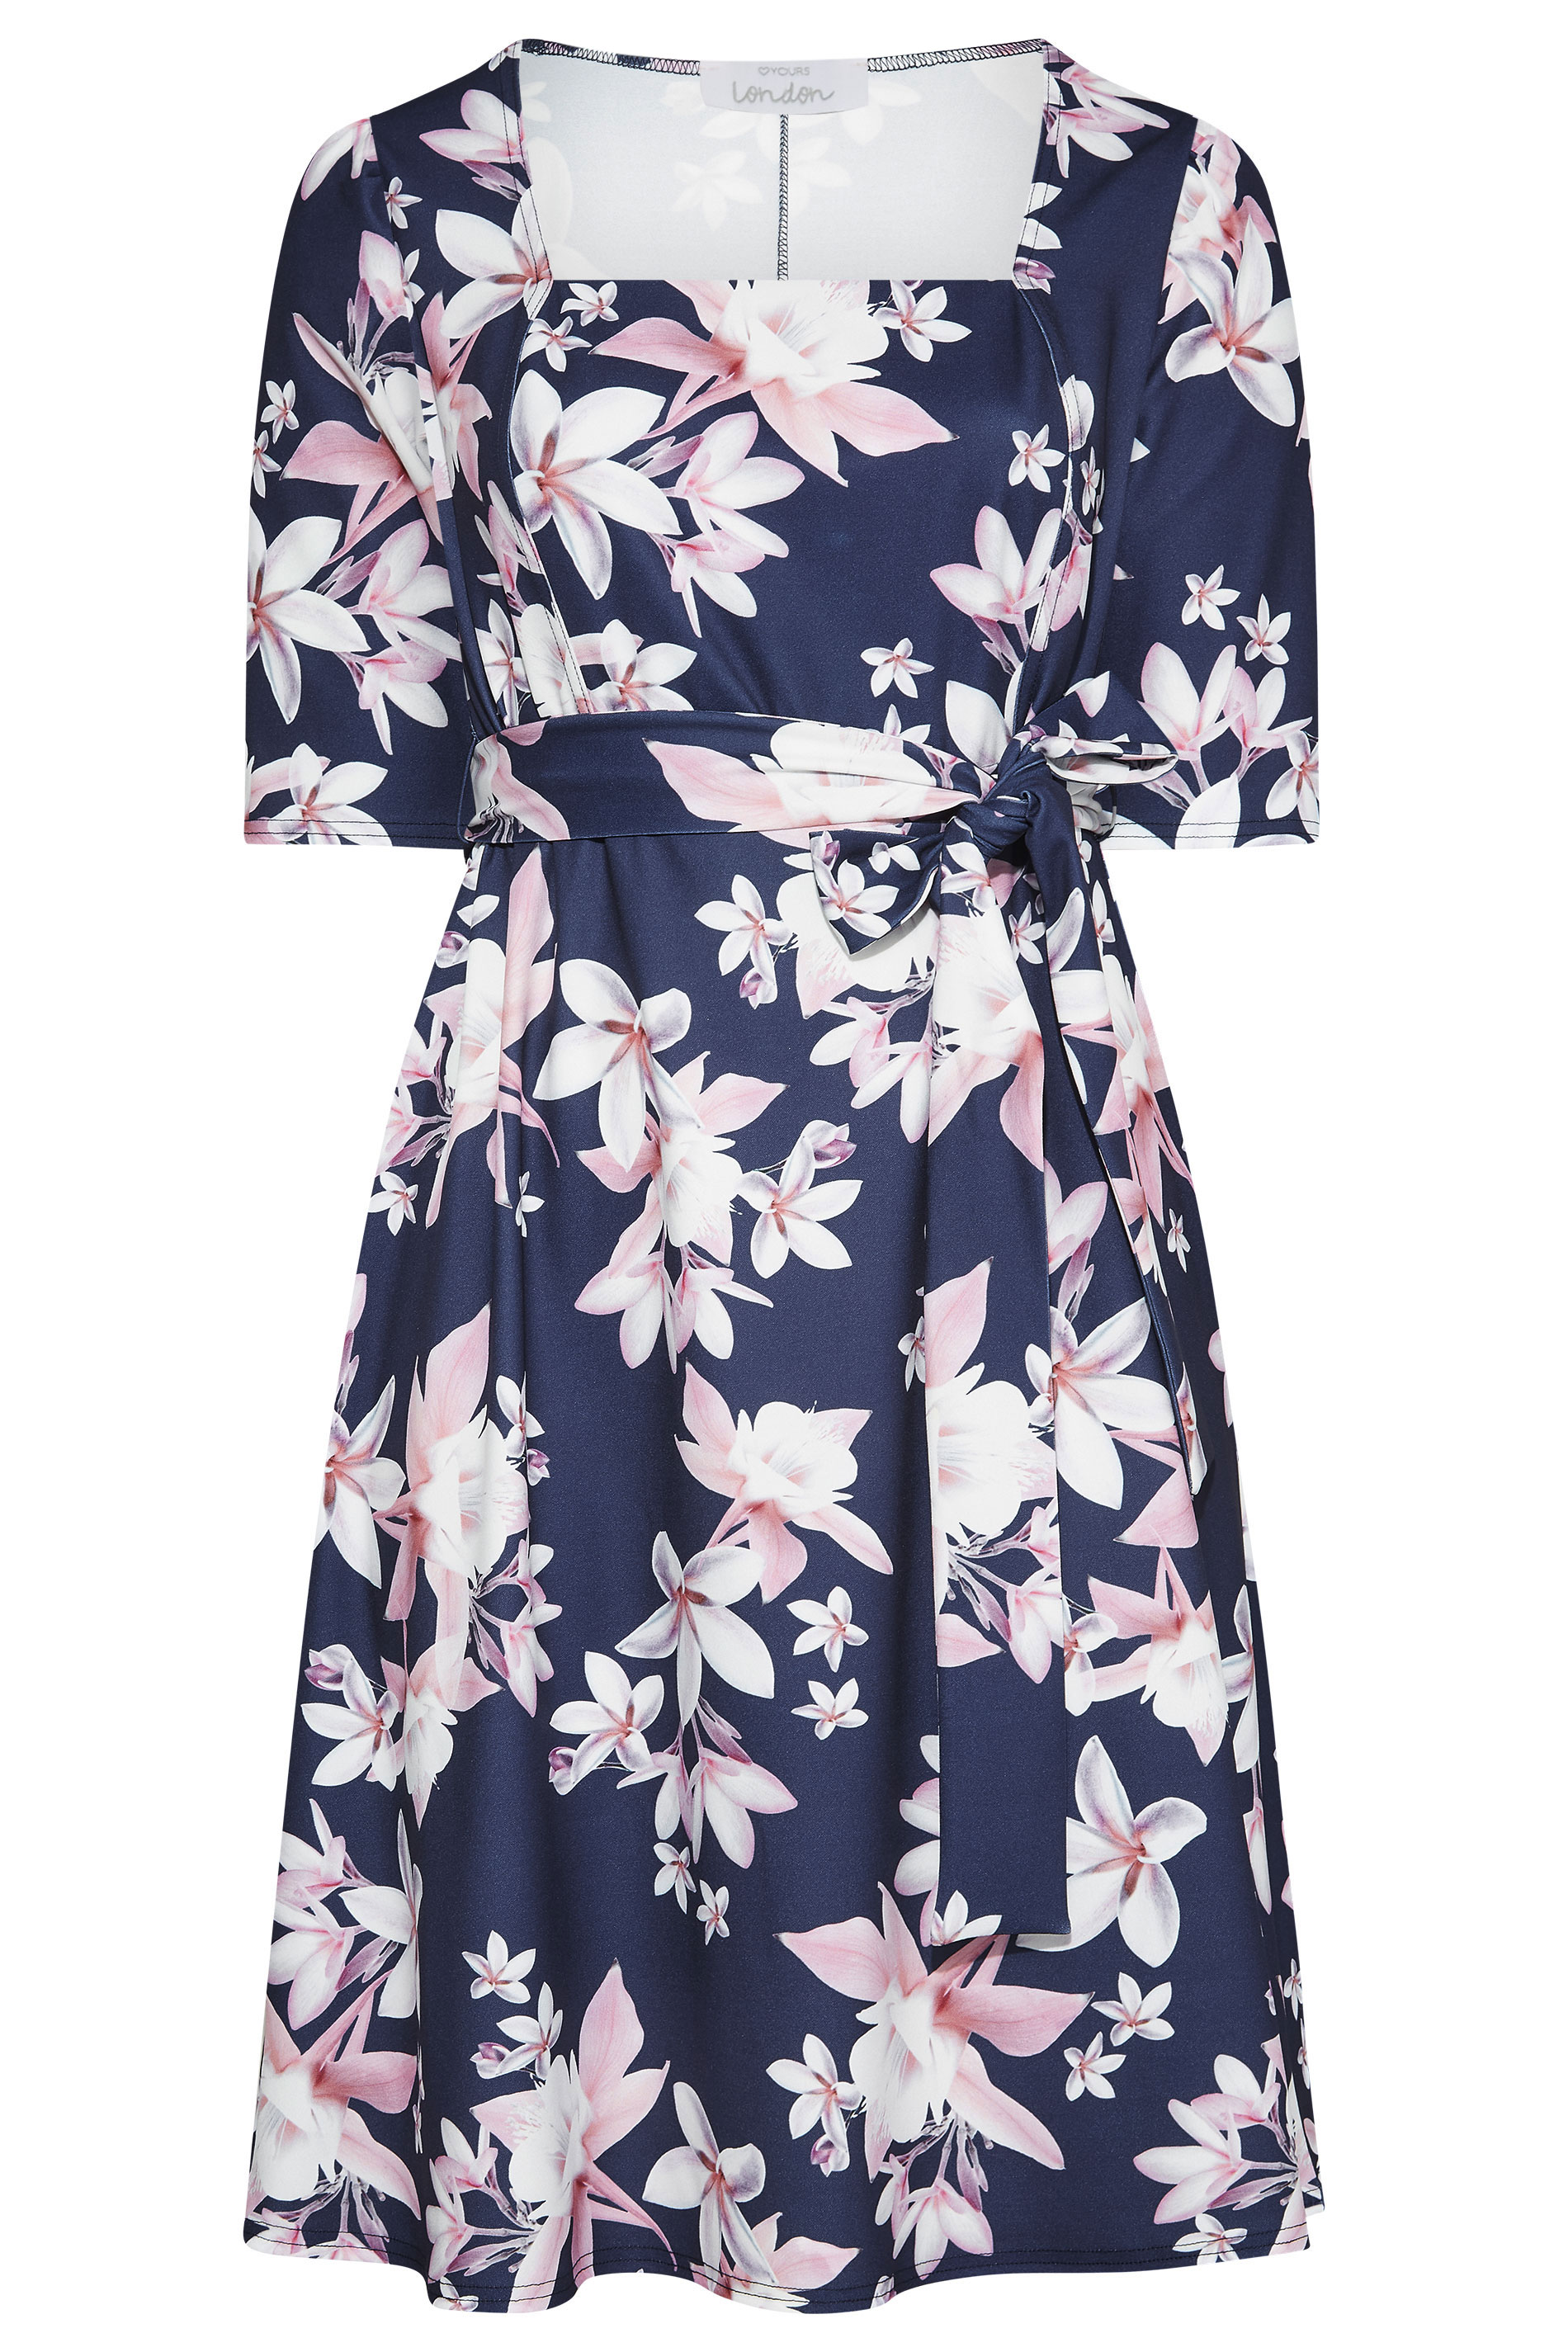 Robes Grande Taille Grande taille  Robes Imprimé Floral | YOURS LONDON - Robe Bleue Marine Floral Manches Courtes - XM72524